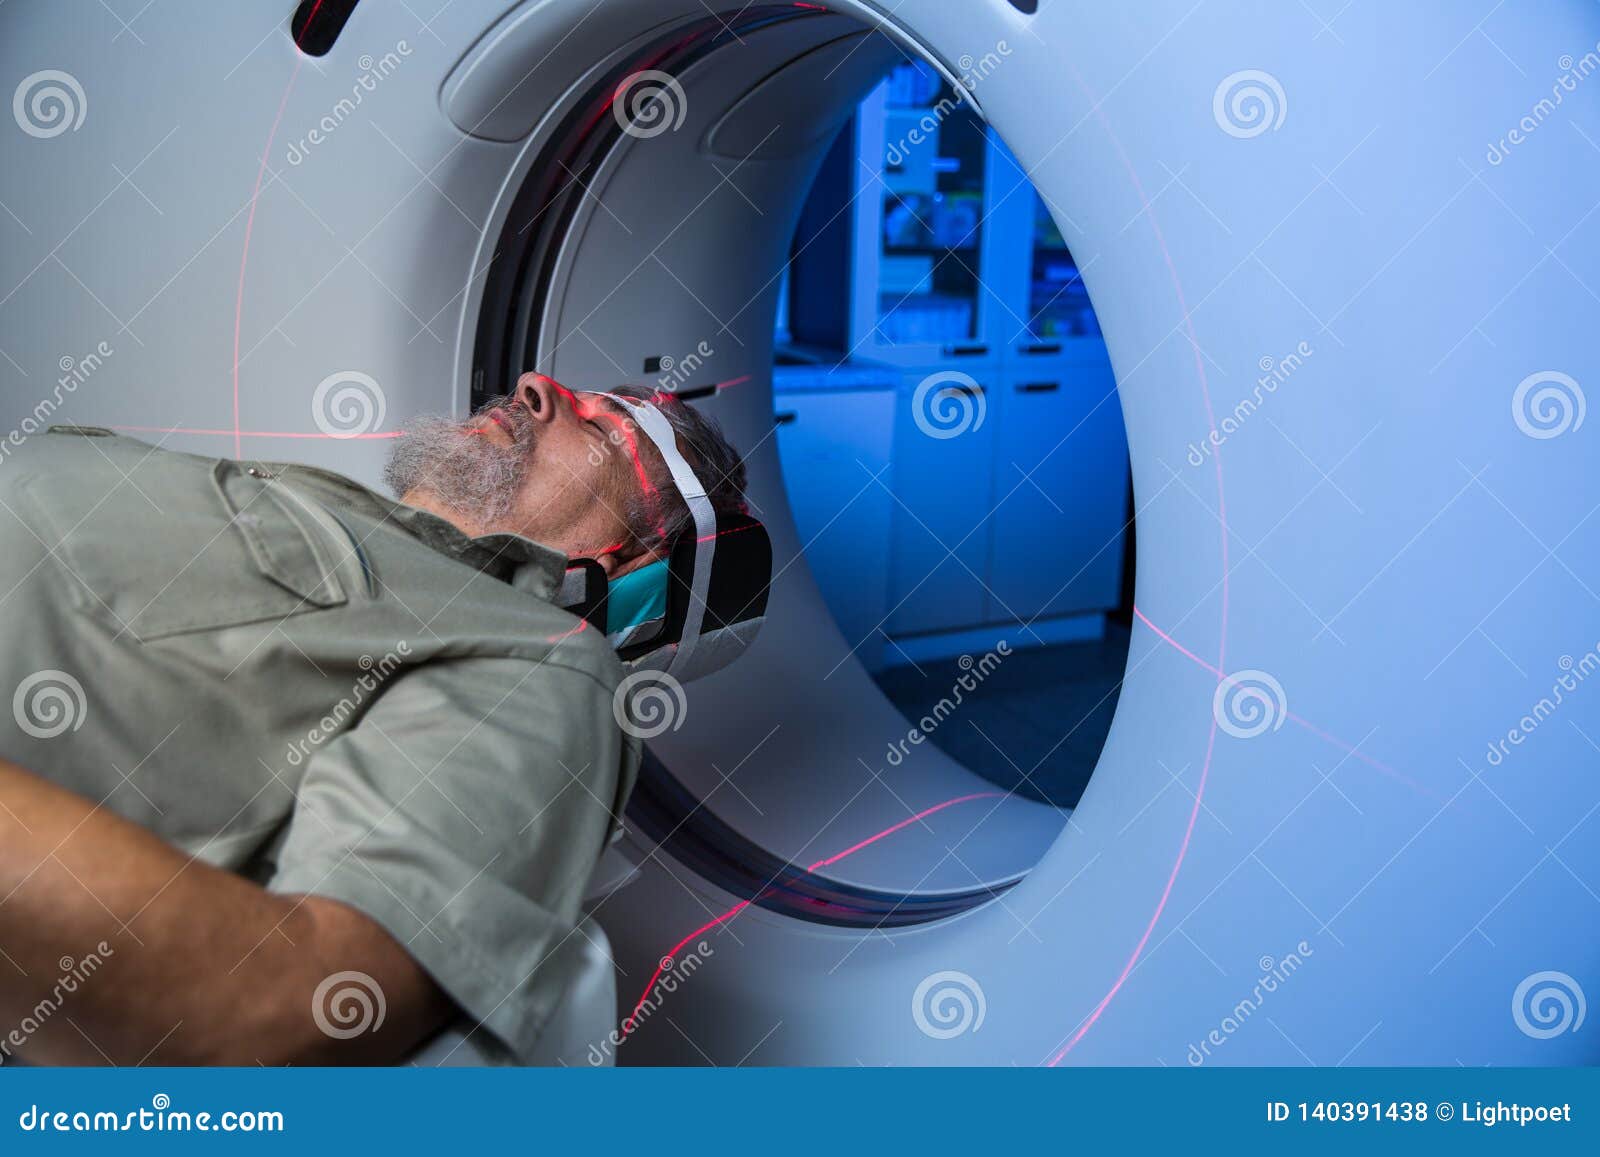 senior male patient undergoing a mri examination in a modern hospital